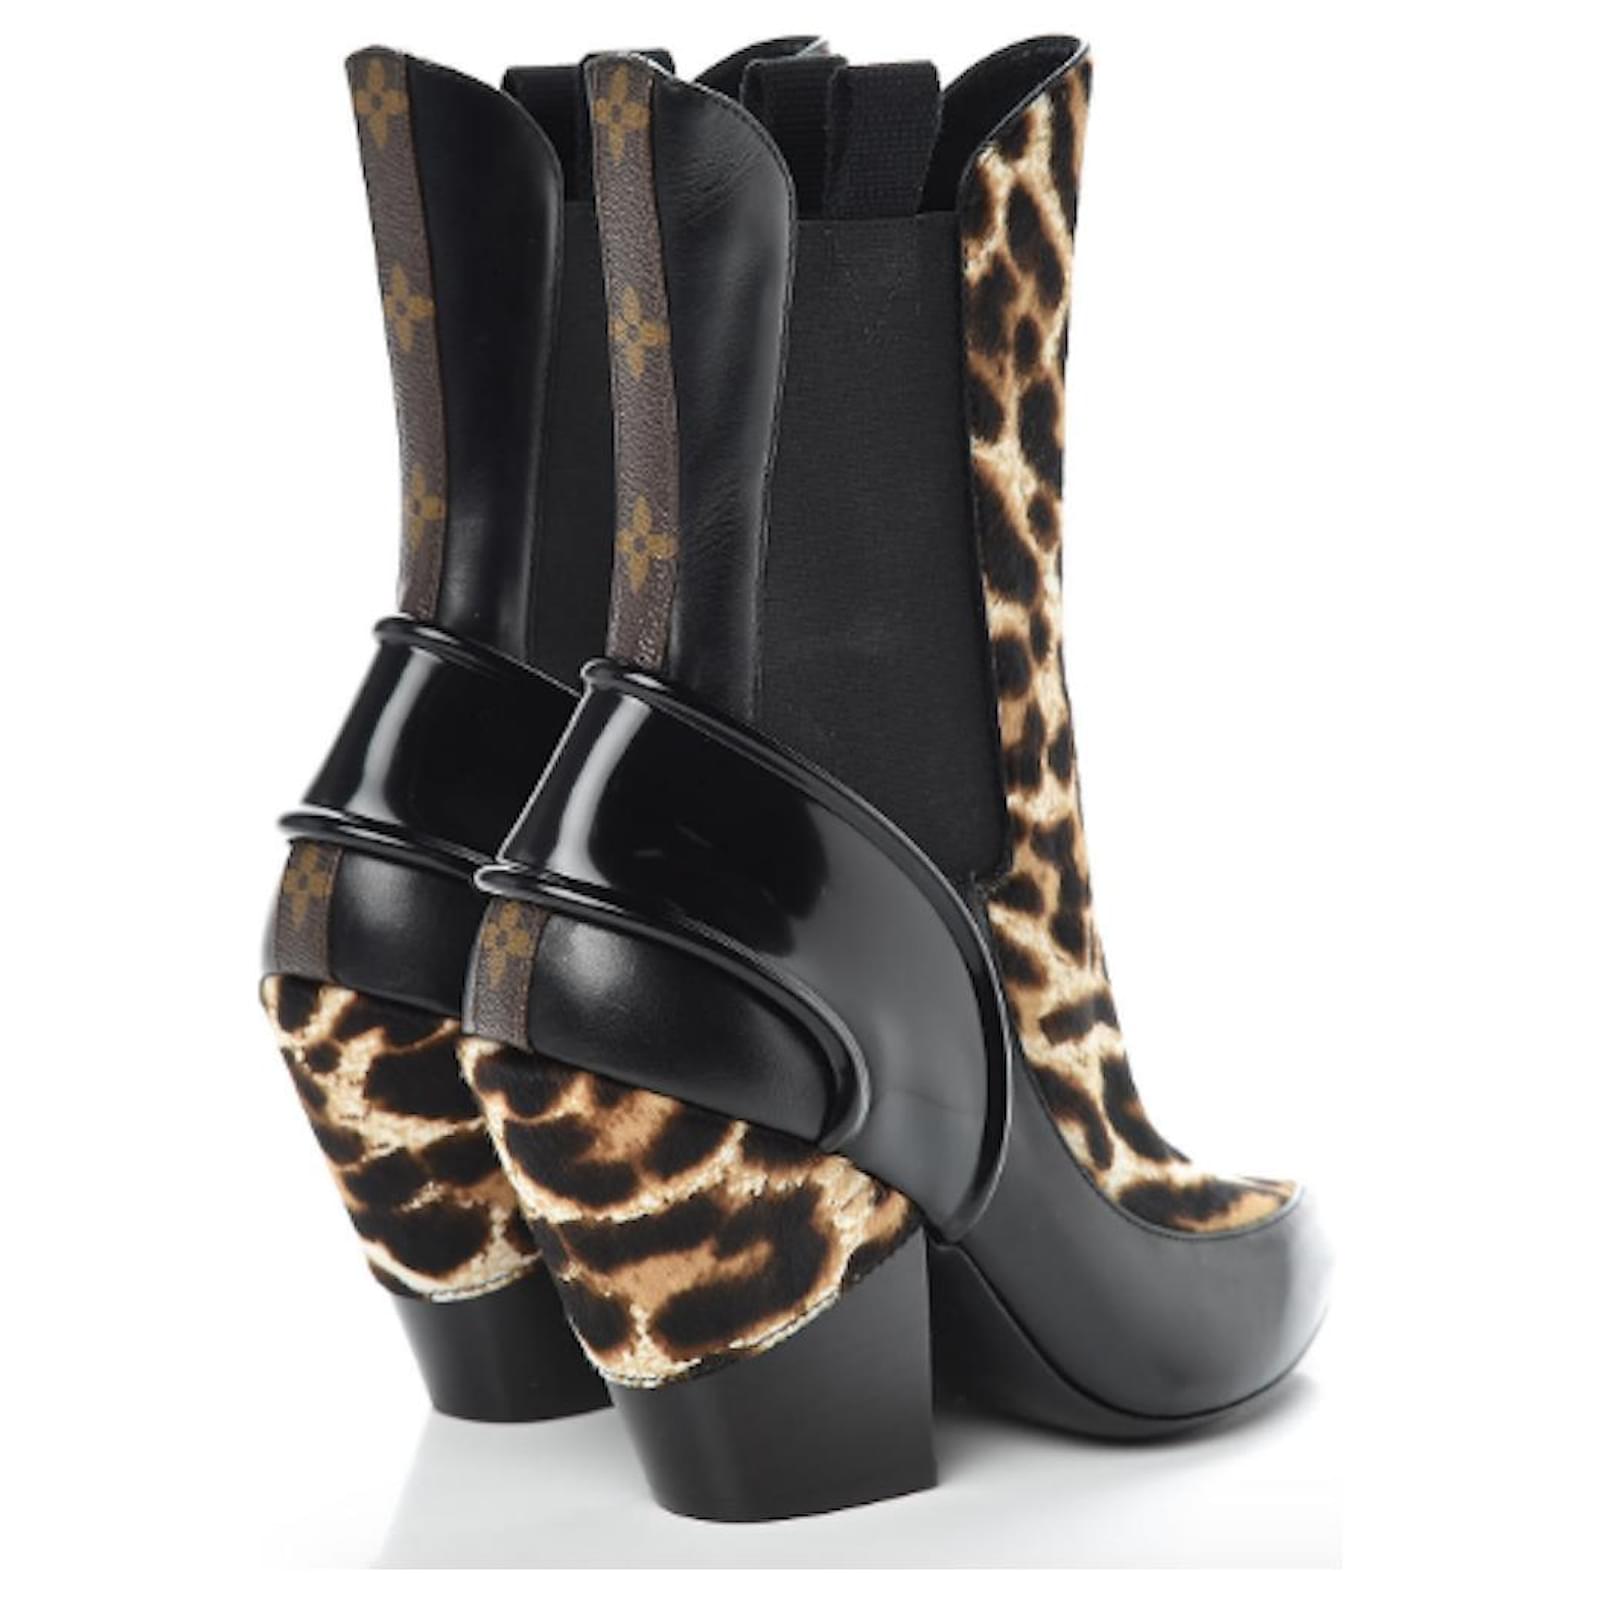 Louis Vuitton Black Leather and Monogram Canvas Fireball Boots